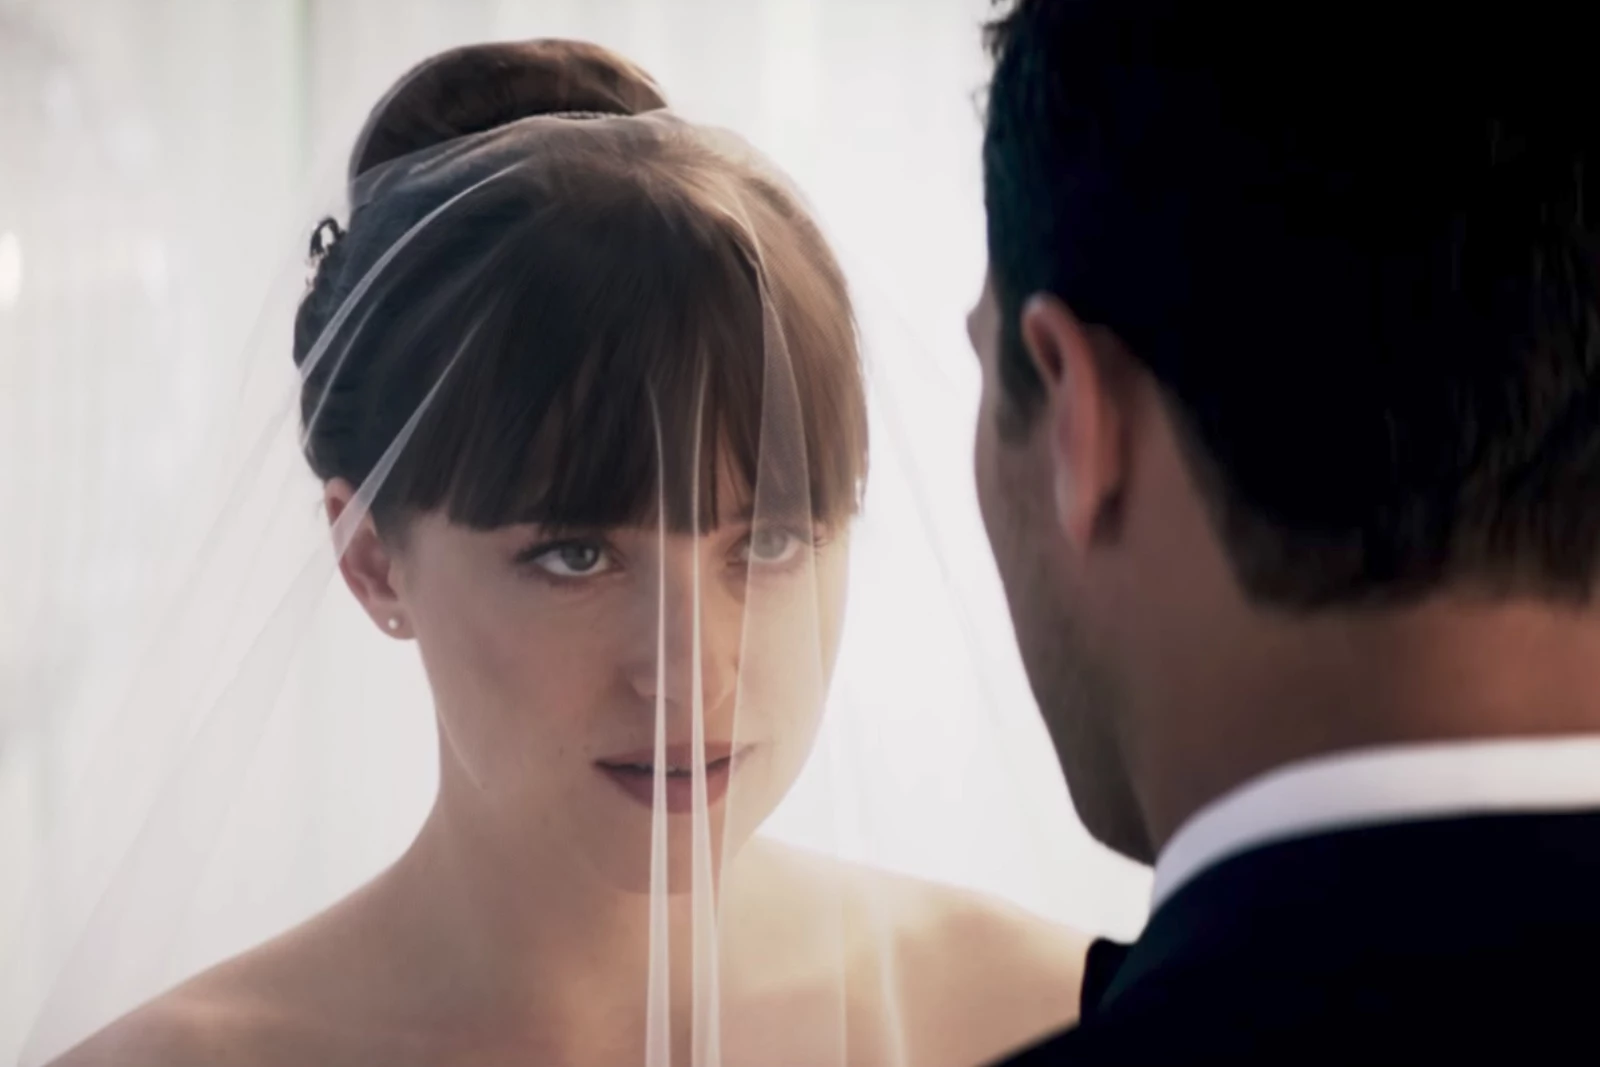 watch 50 shades of grey freed online free vimeo